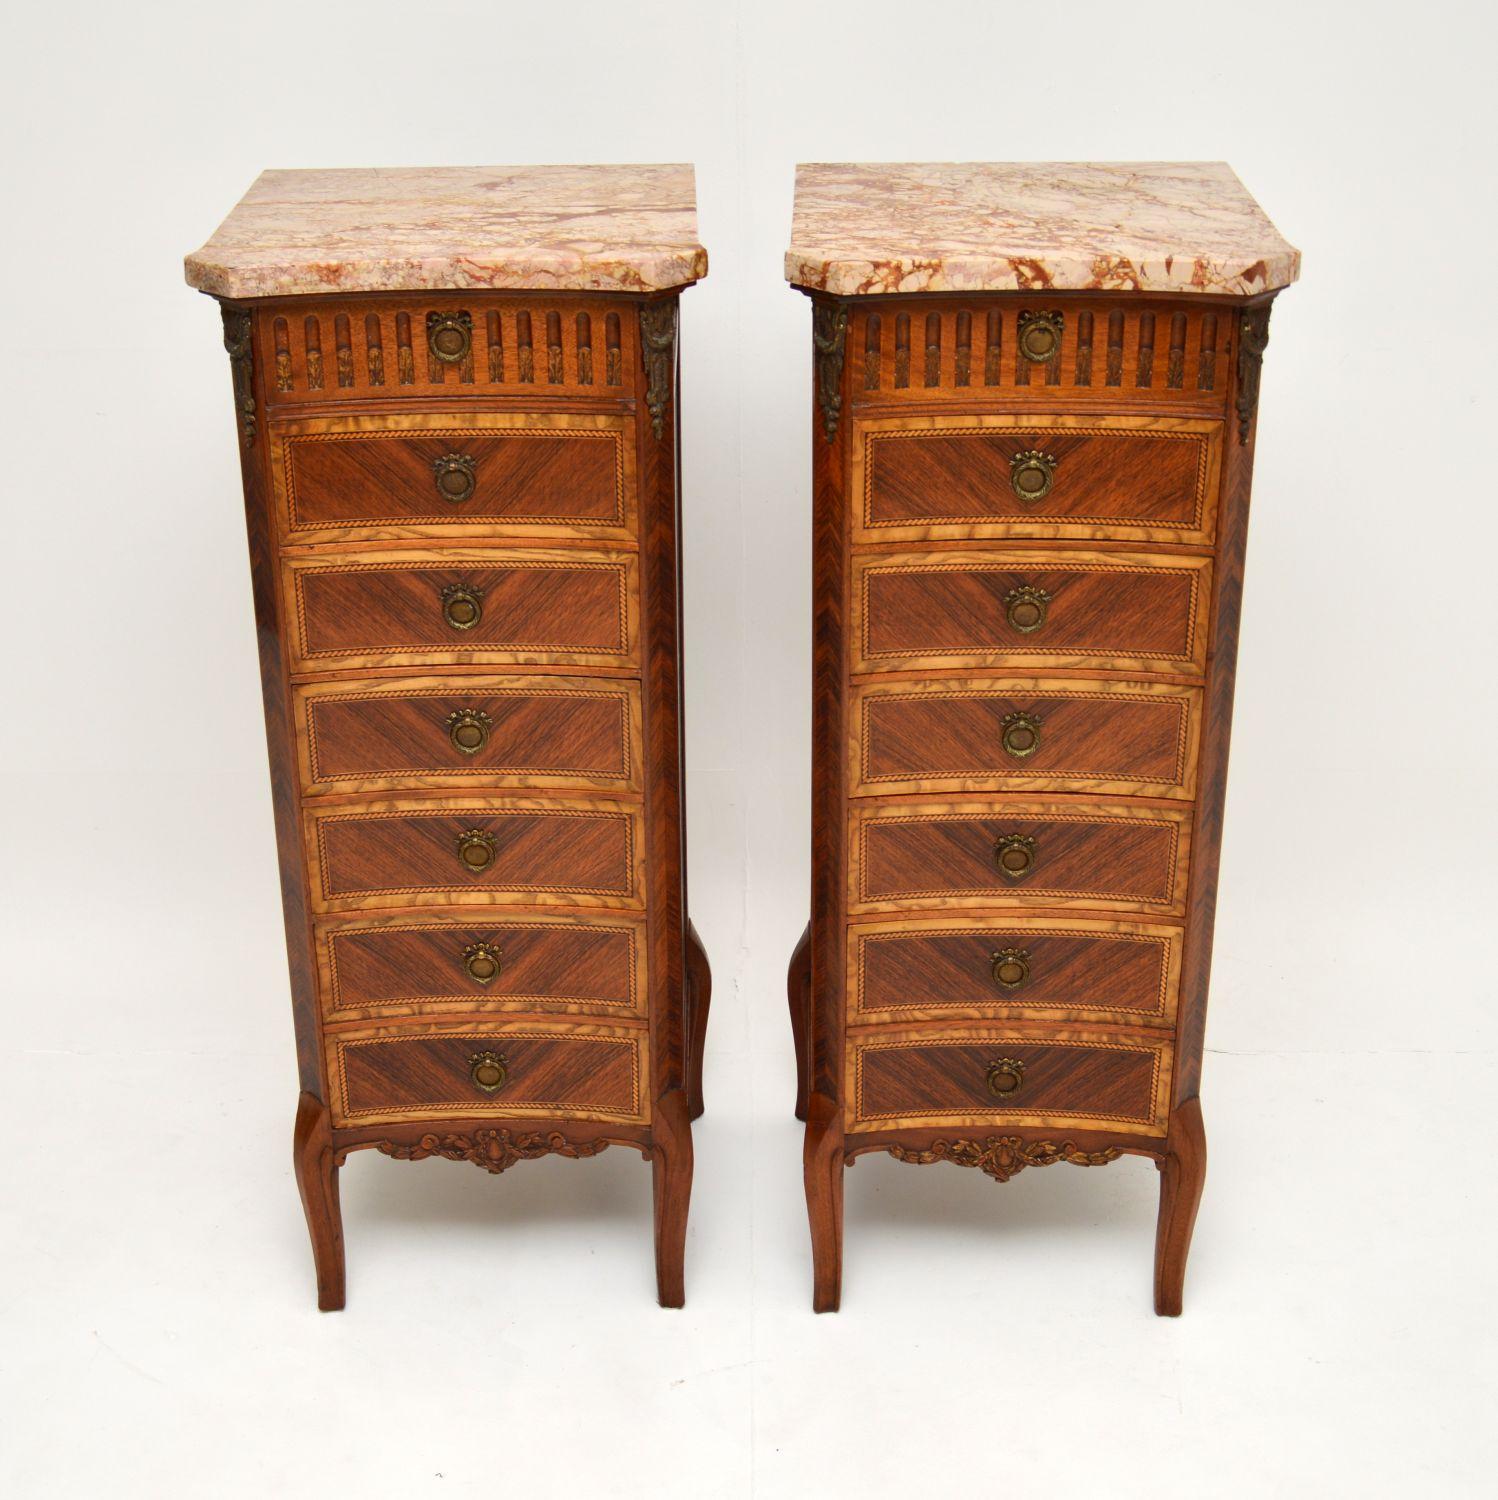 An exquisite pair of tall antique marble top chests with concave fronts, beautifully made from a combination of woods. These were made in France & I would date them from around the 1910-20’s period.

The quality is absolutely superb, they are